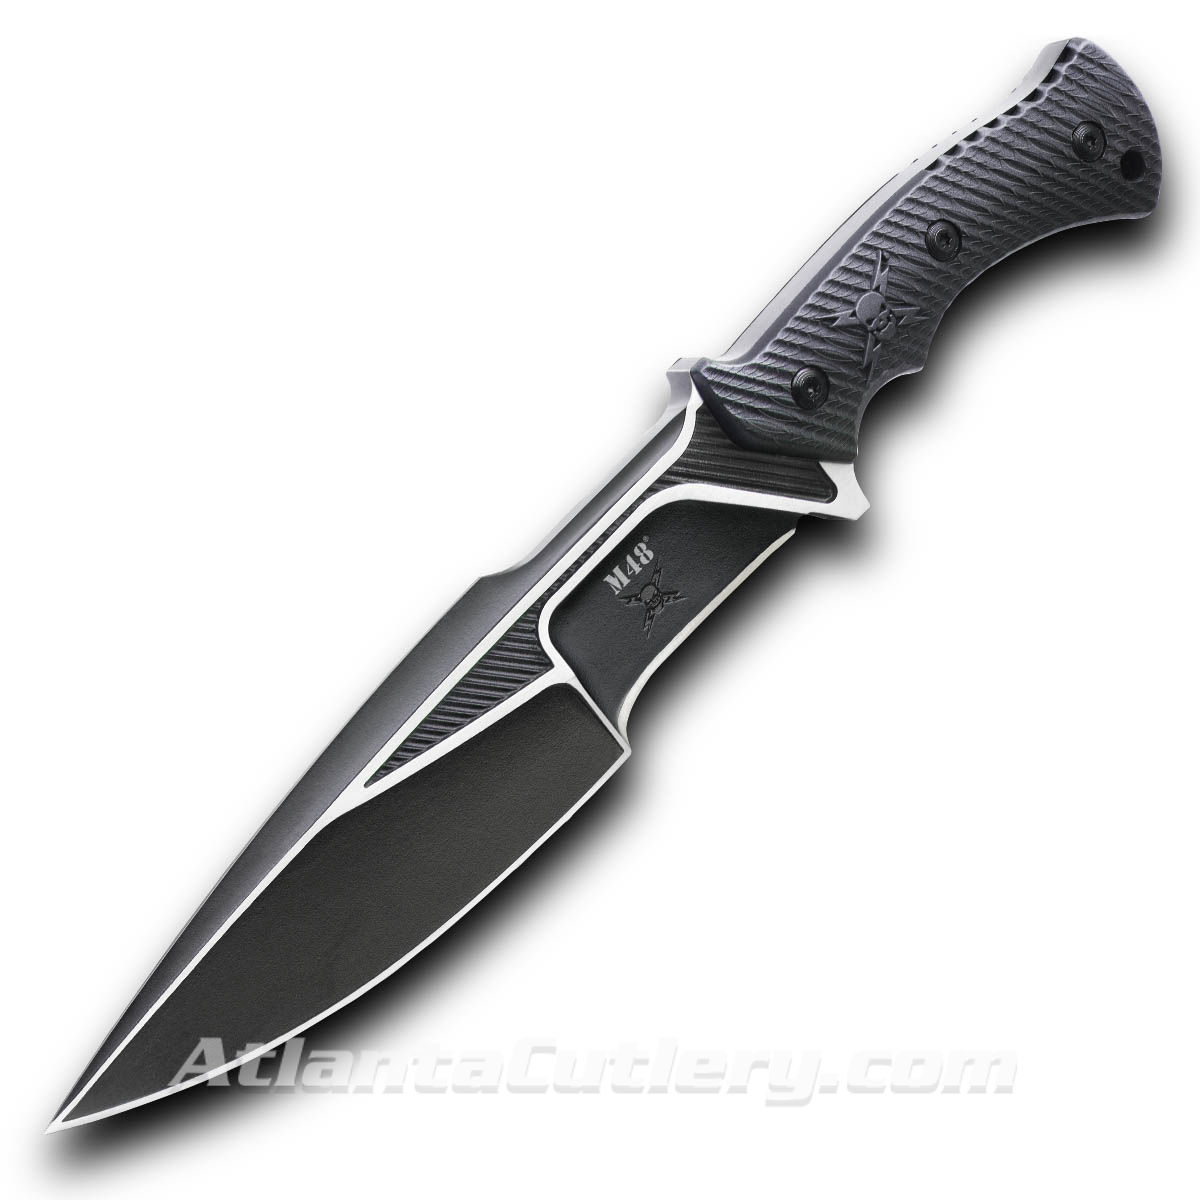 M48 Liberator Sabotage II Combat Knife has black oxide coating on 2Cr13 stainless steel blade & G10 scales